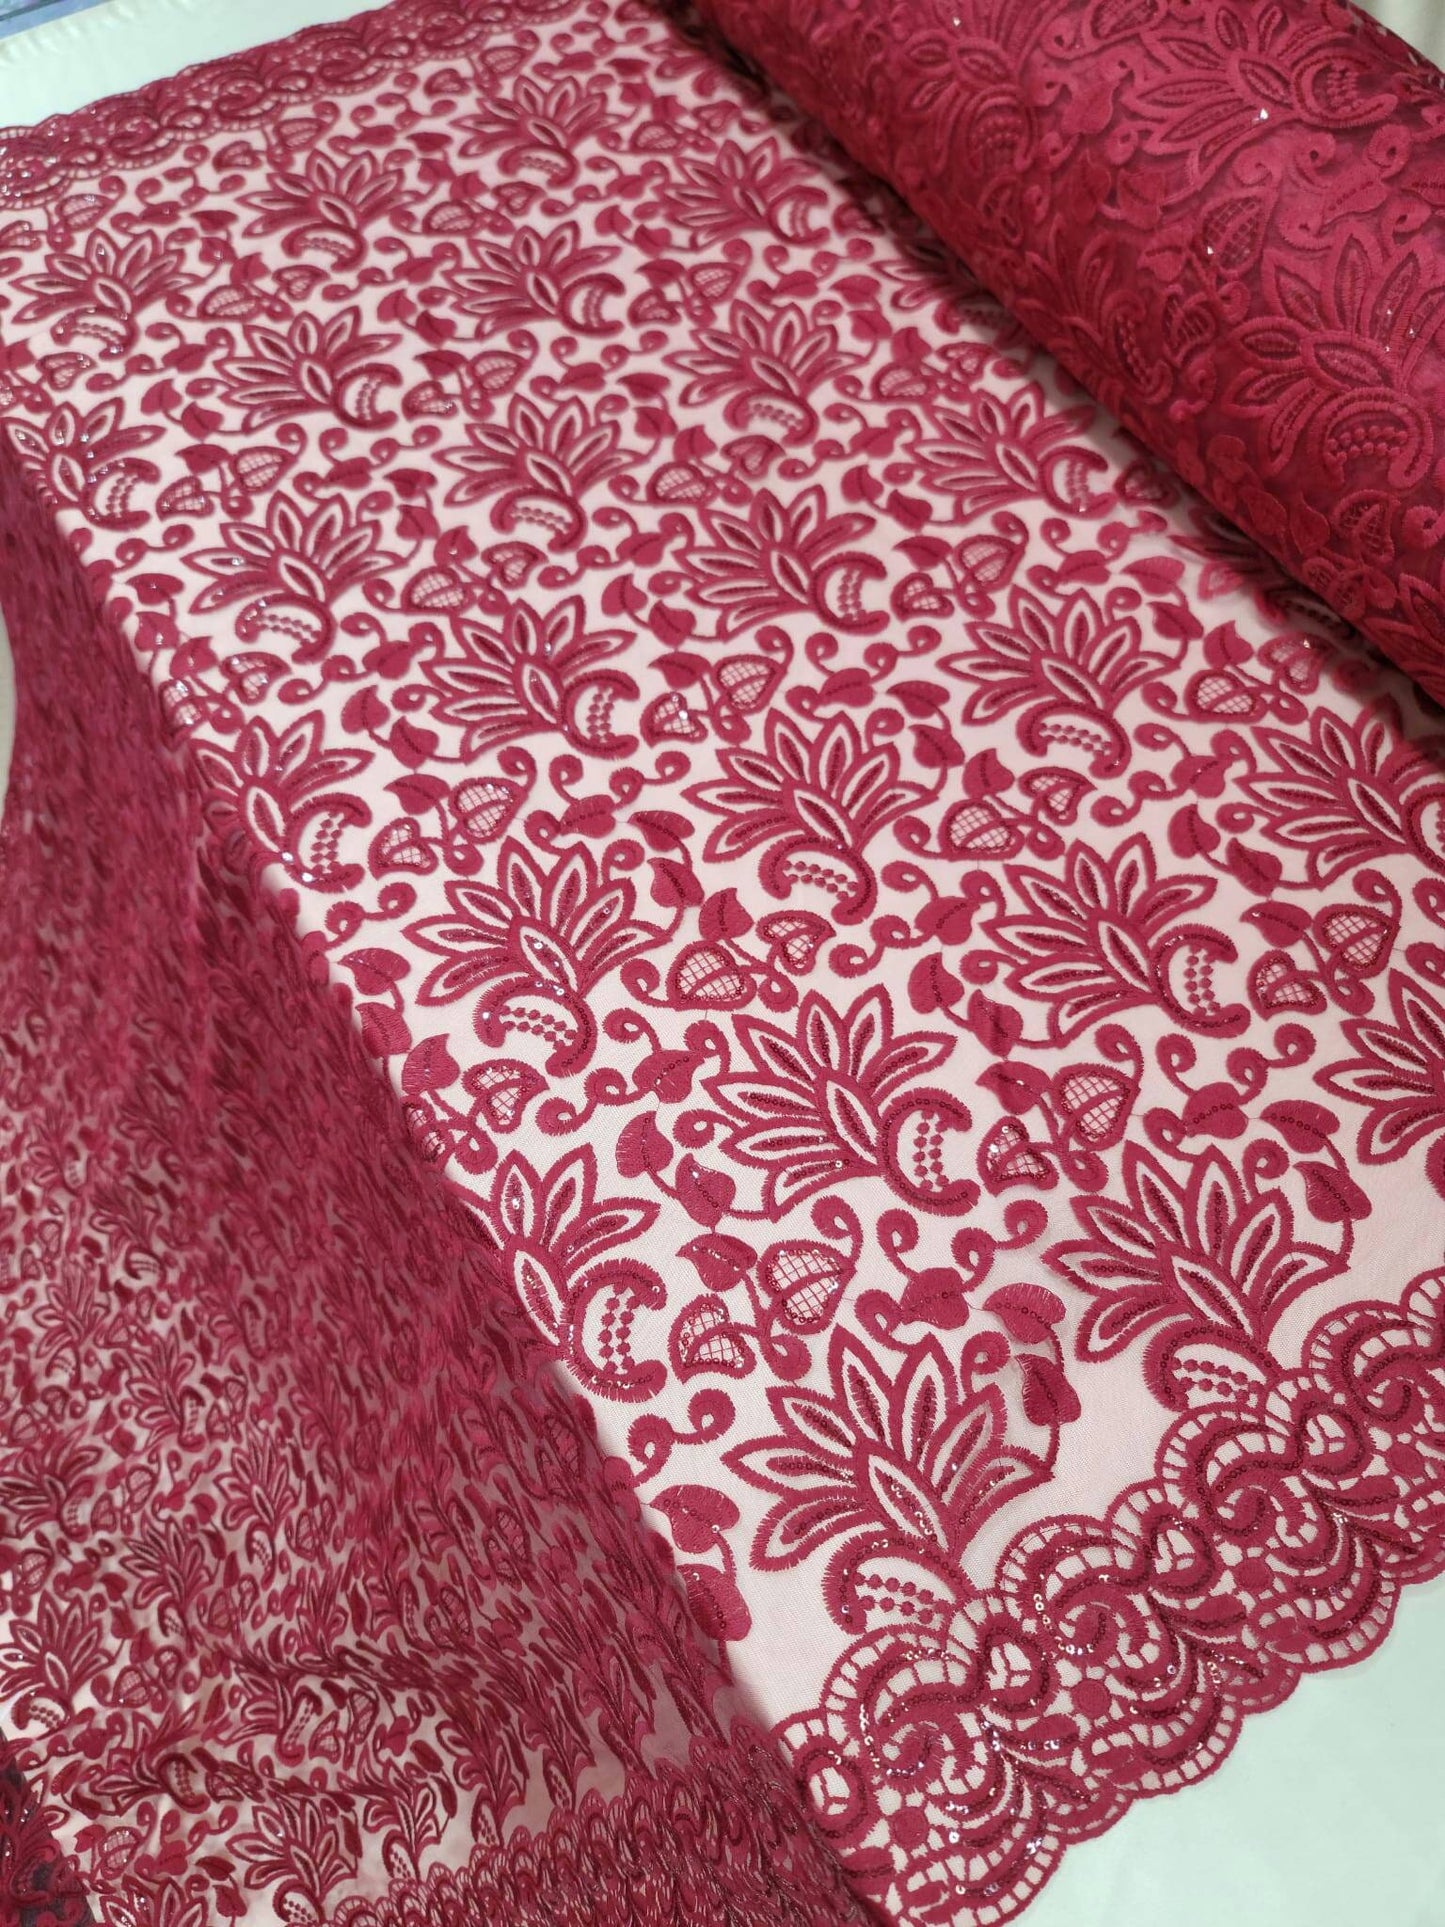 Burgundy Embroidered Lace Floral Flowers Double Scallops Clear Sequin Fabric By The Yard Gown Quinceañera Bridal